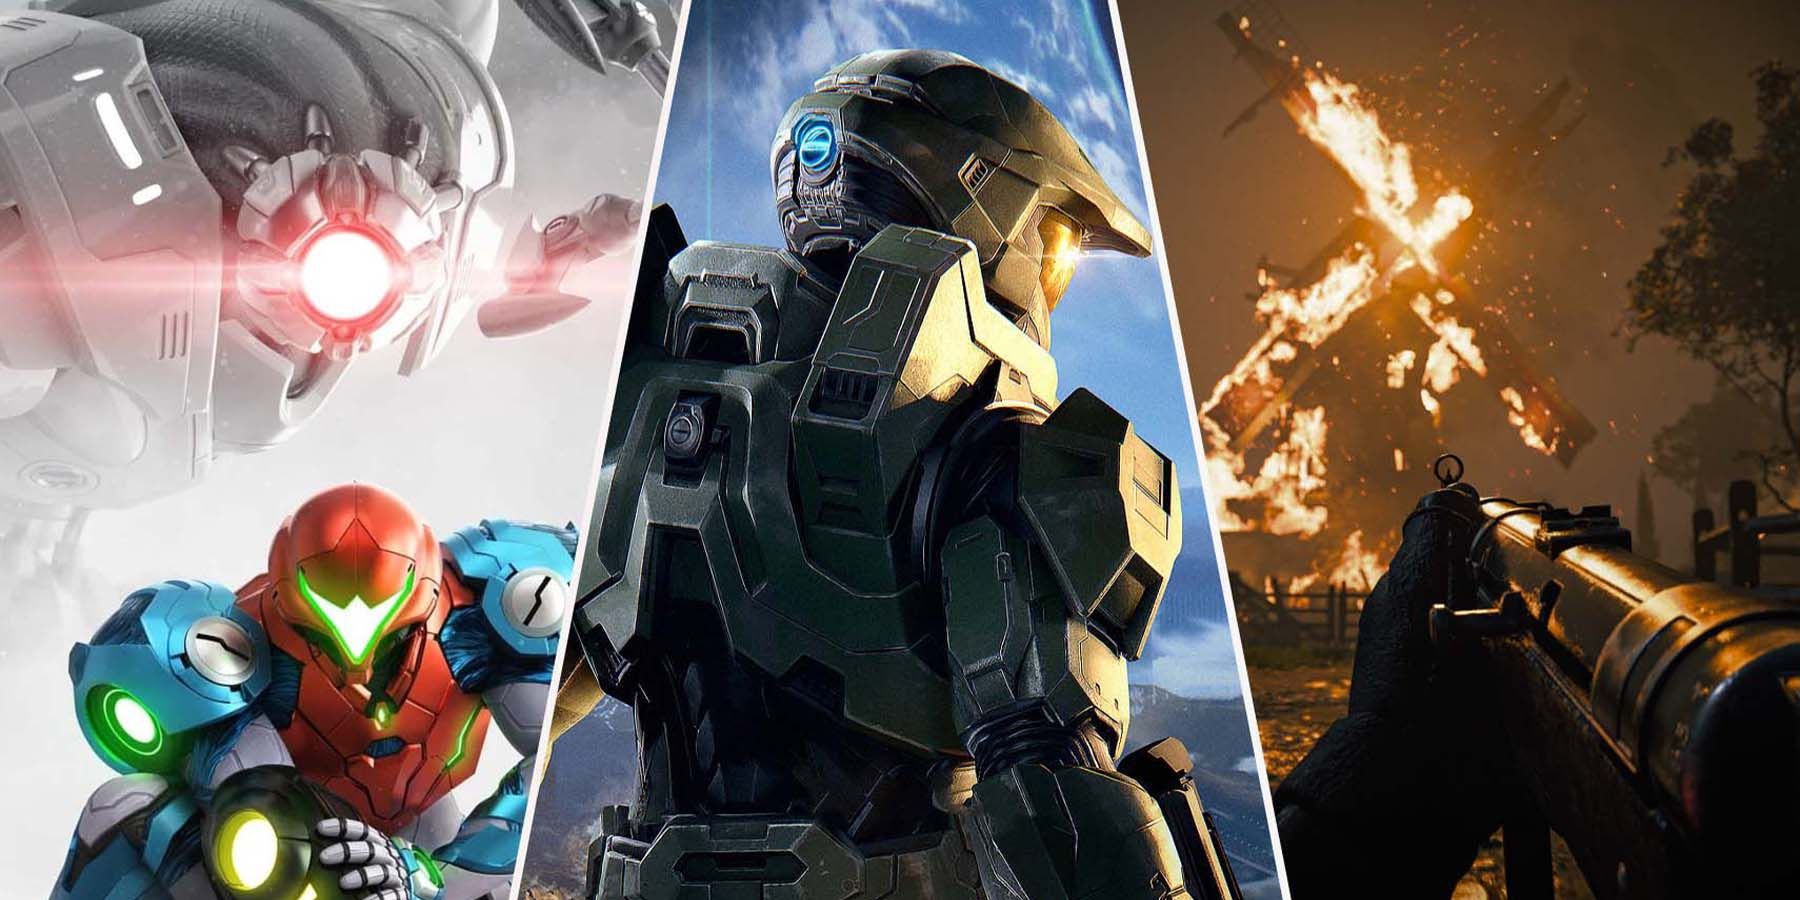 11 Games Coming In 2021 (Ranked By Their Graphics) halo, metroid dread, call of duty vanguard